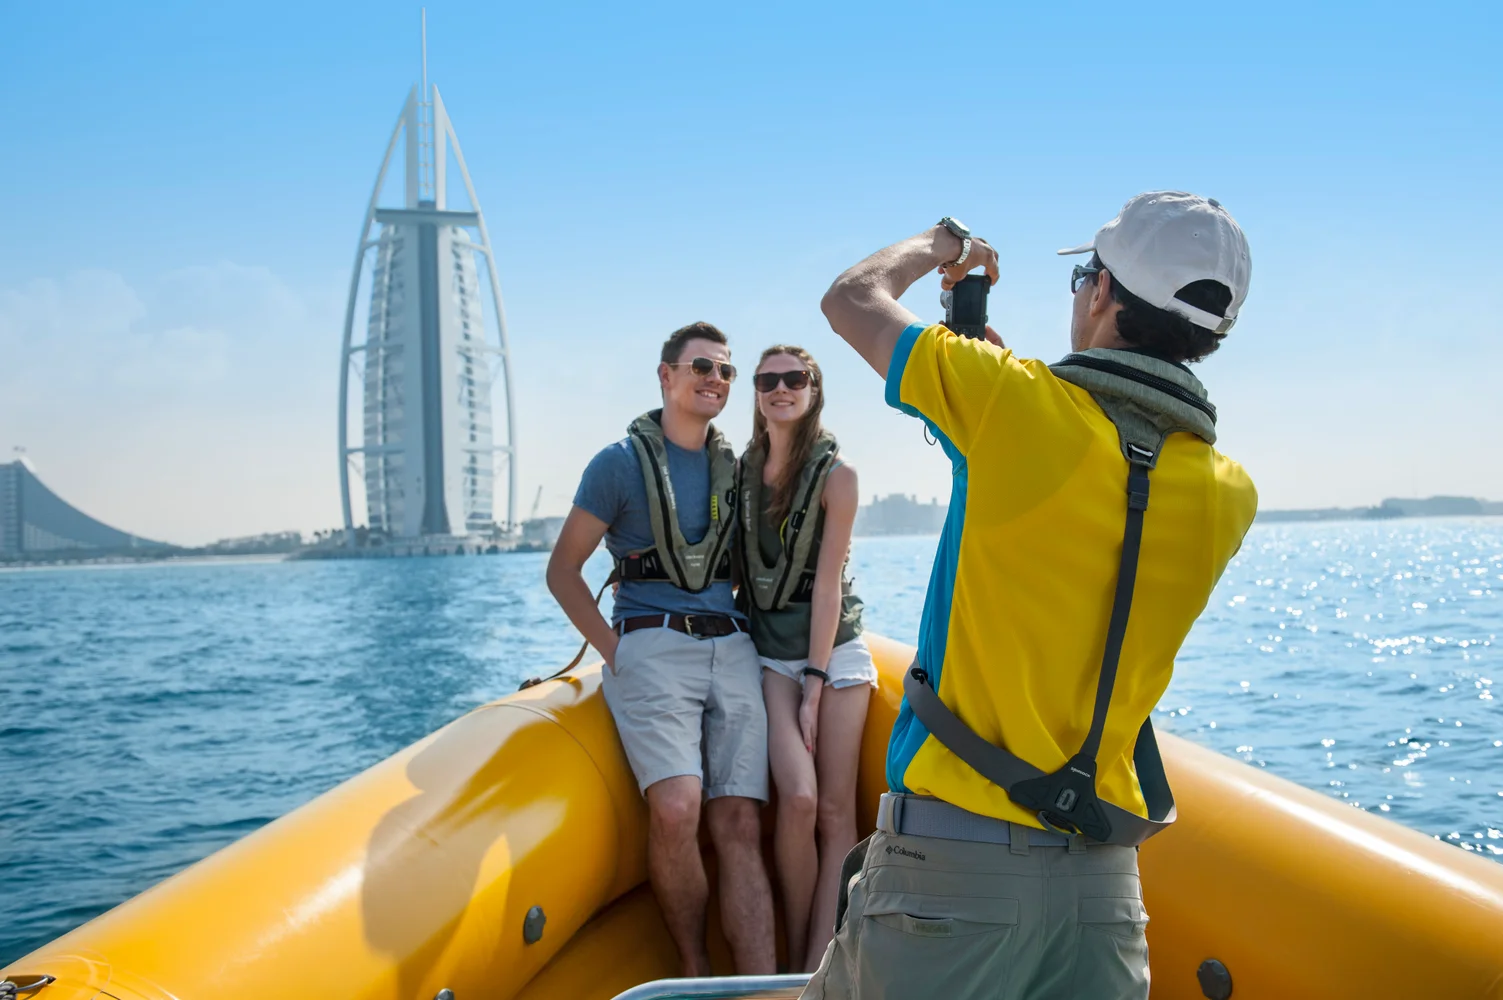 The Yellow Boats: Speedboat Sightseeing Tours of Dubai